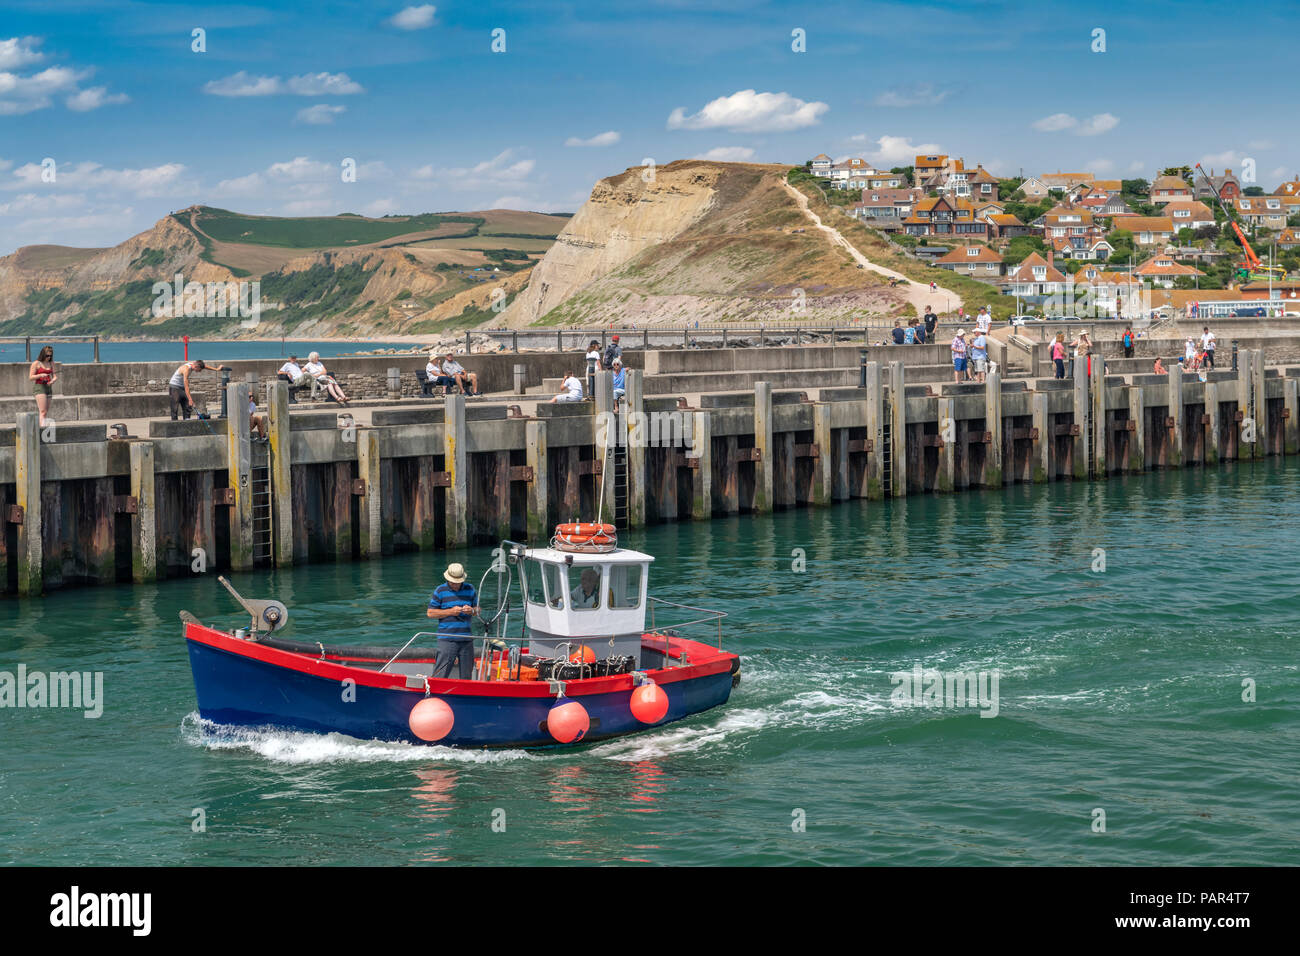 A little fishing boat leaves the picturesque harbour at West Bay in Dorset, made famous as the location for the television series 'Broadchurch'. Stock Photo